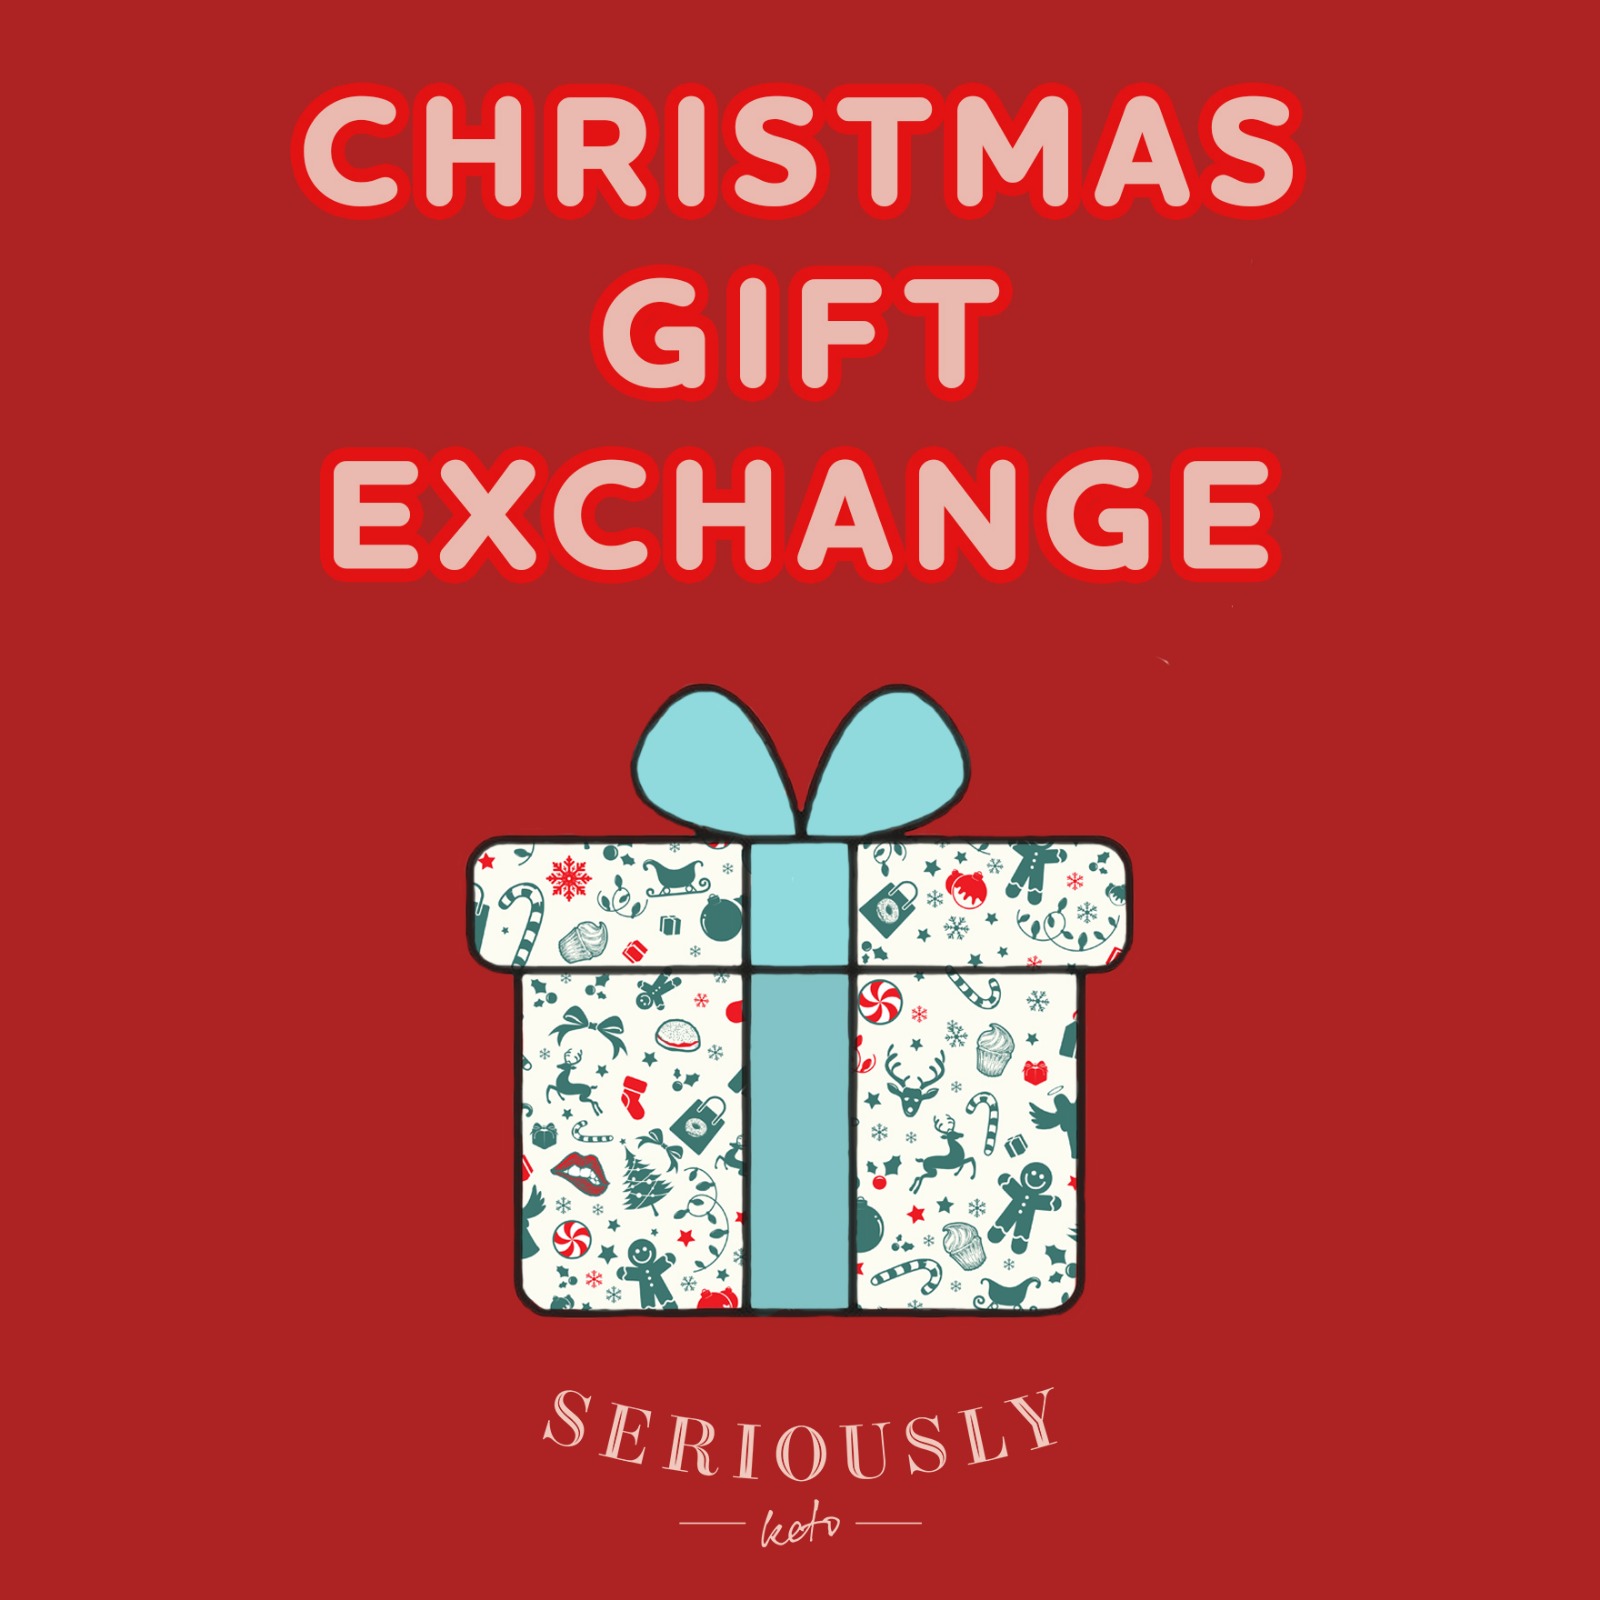 holiday gift exchange images